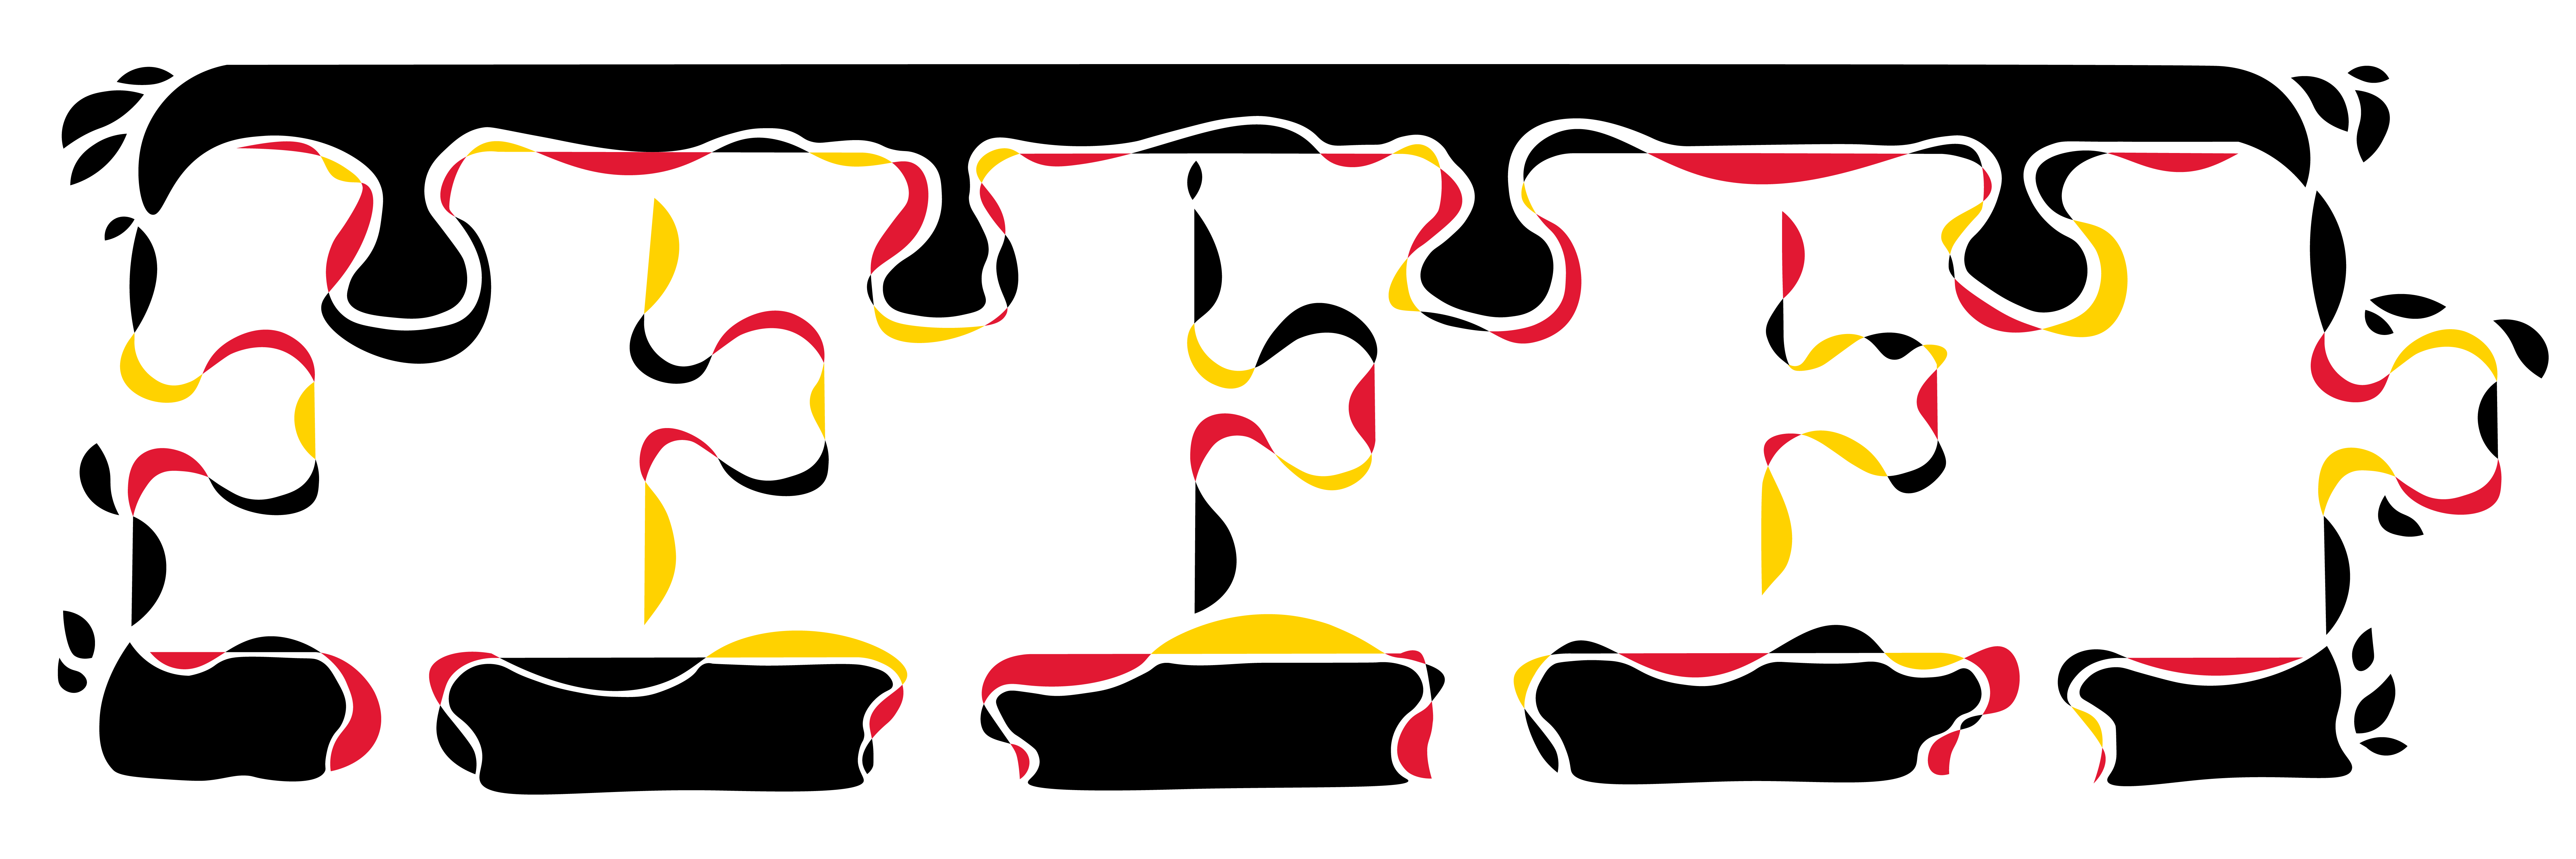 Four illustrated puzzle pieces of red, gold and black link together.